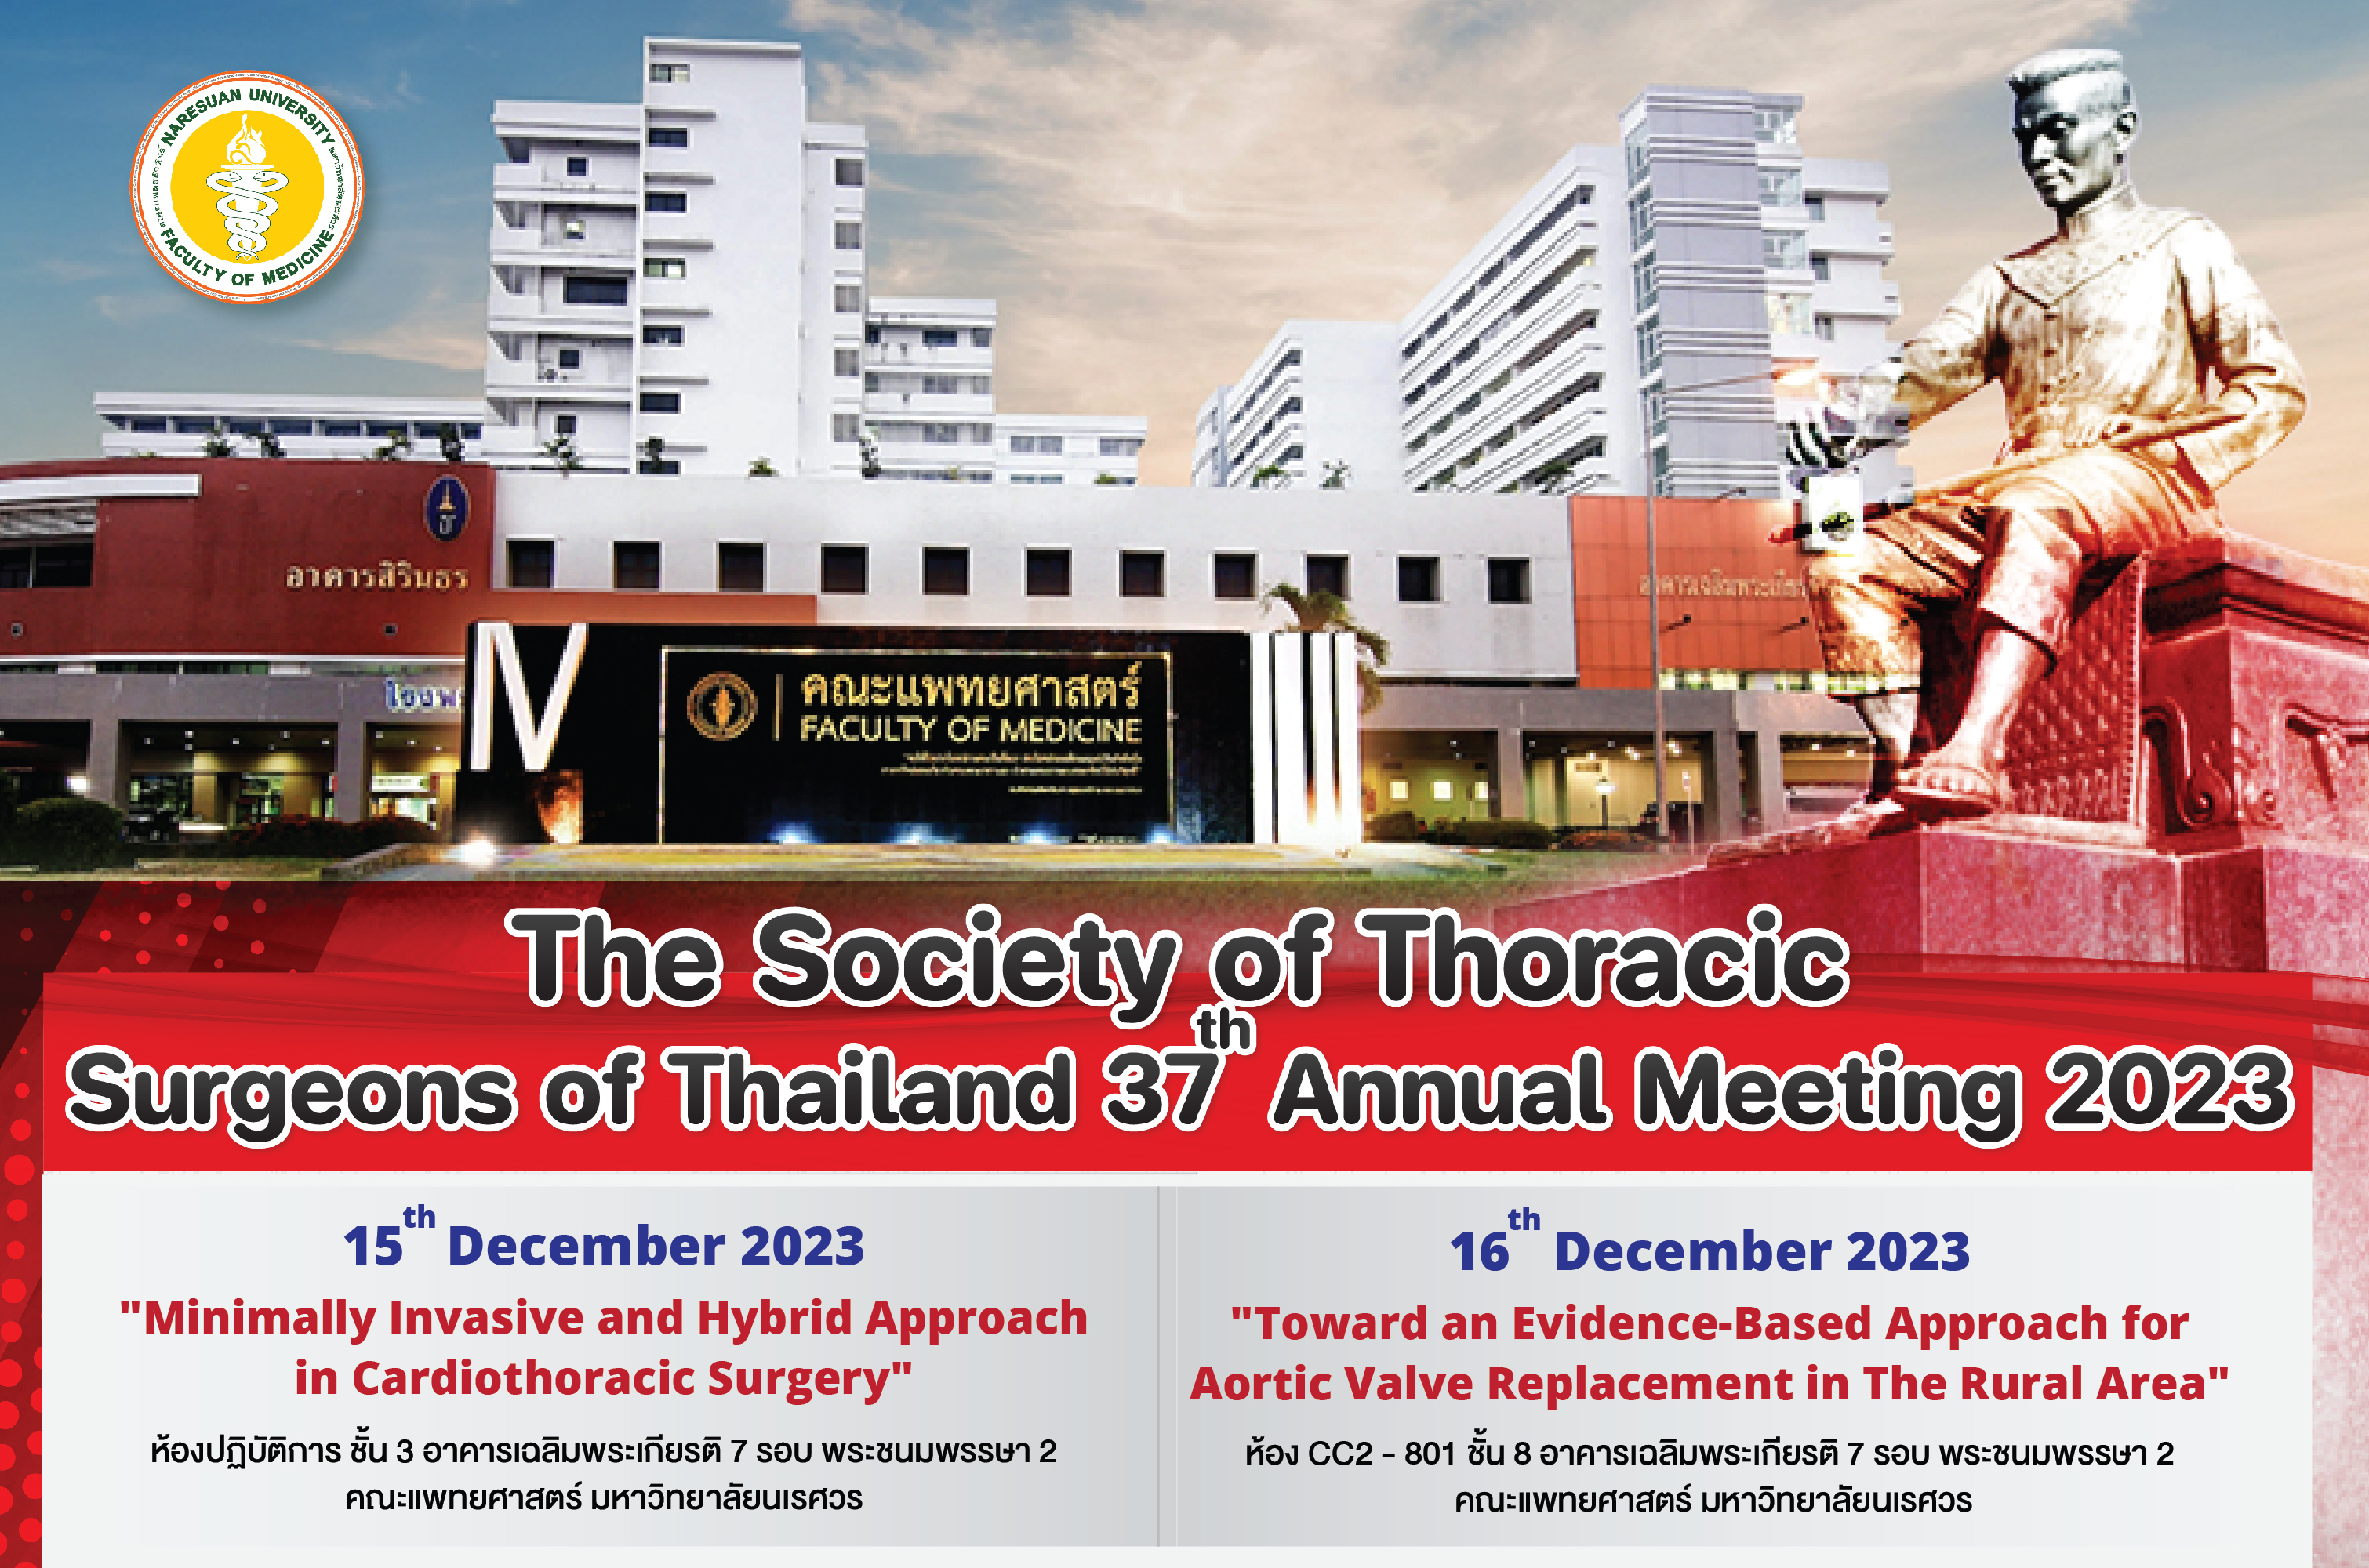 The Society of Thoracic Surgeons of Thailand 37 Annual Meeting 2023